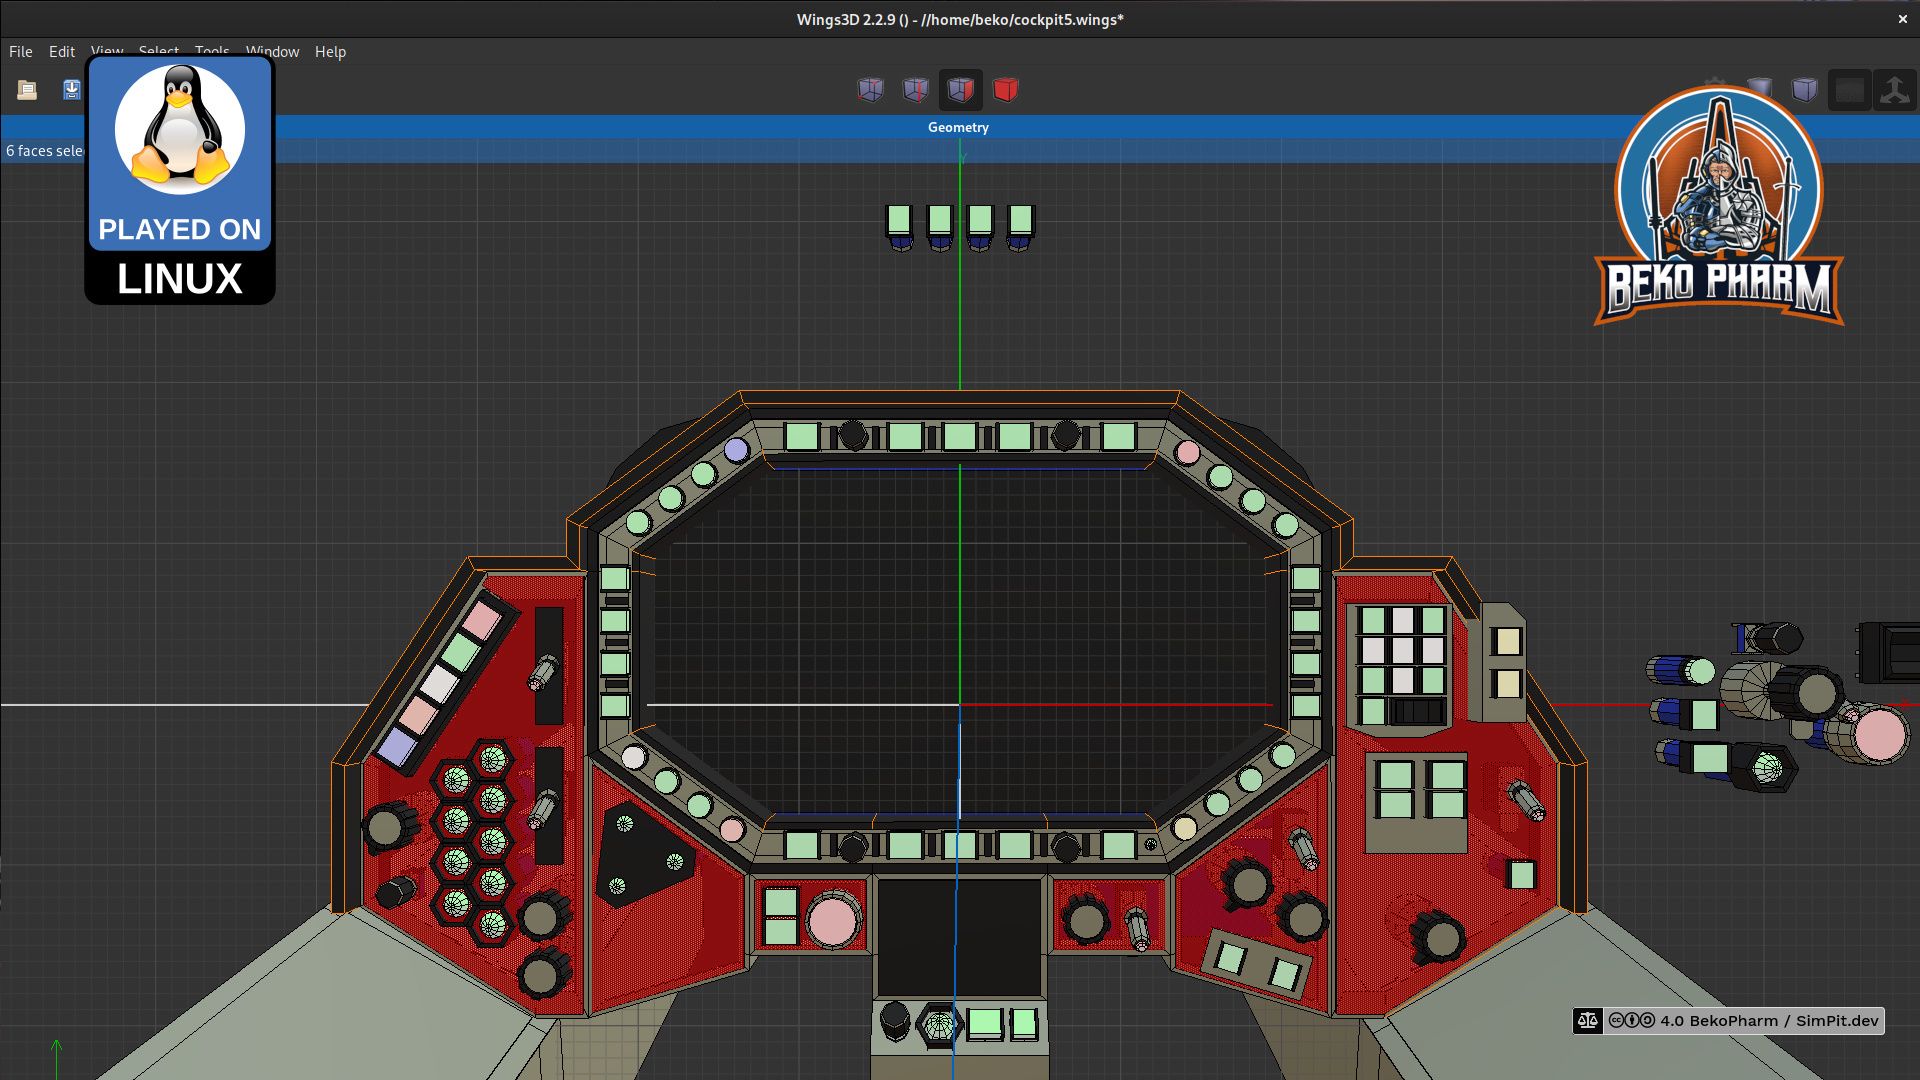 v2 button box as wireframe model in Wings3D